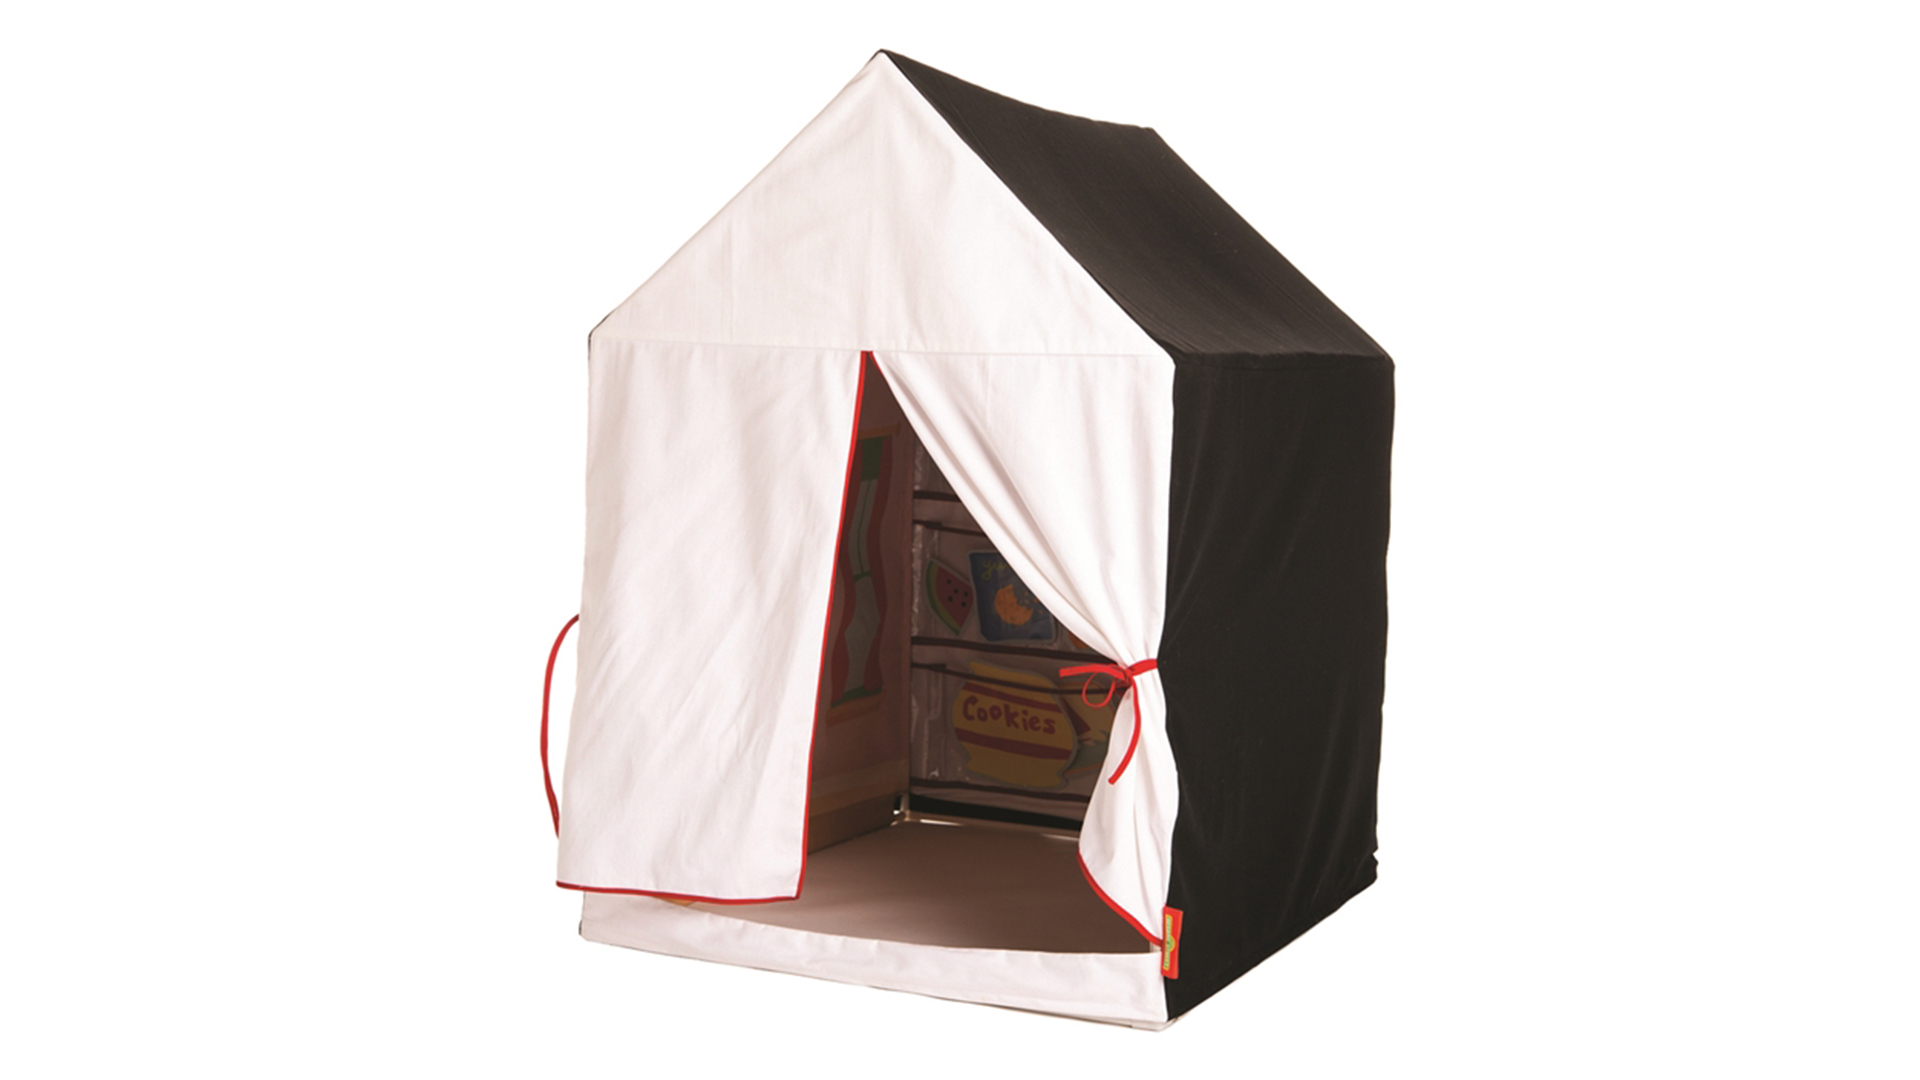 Fabric play set tent with opening tied open